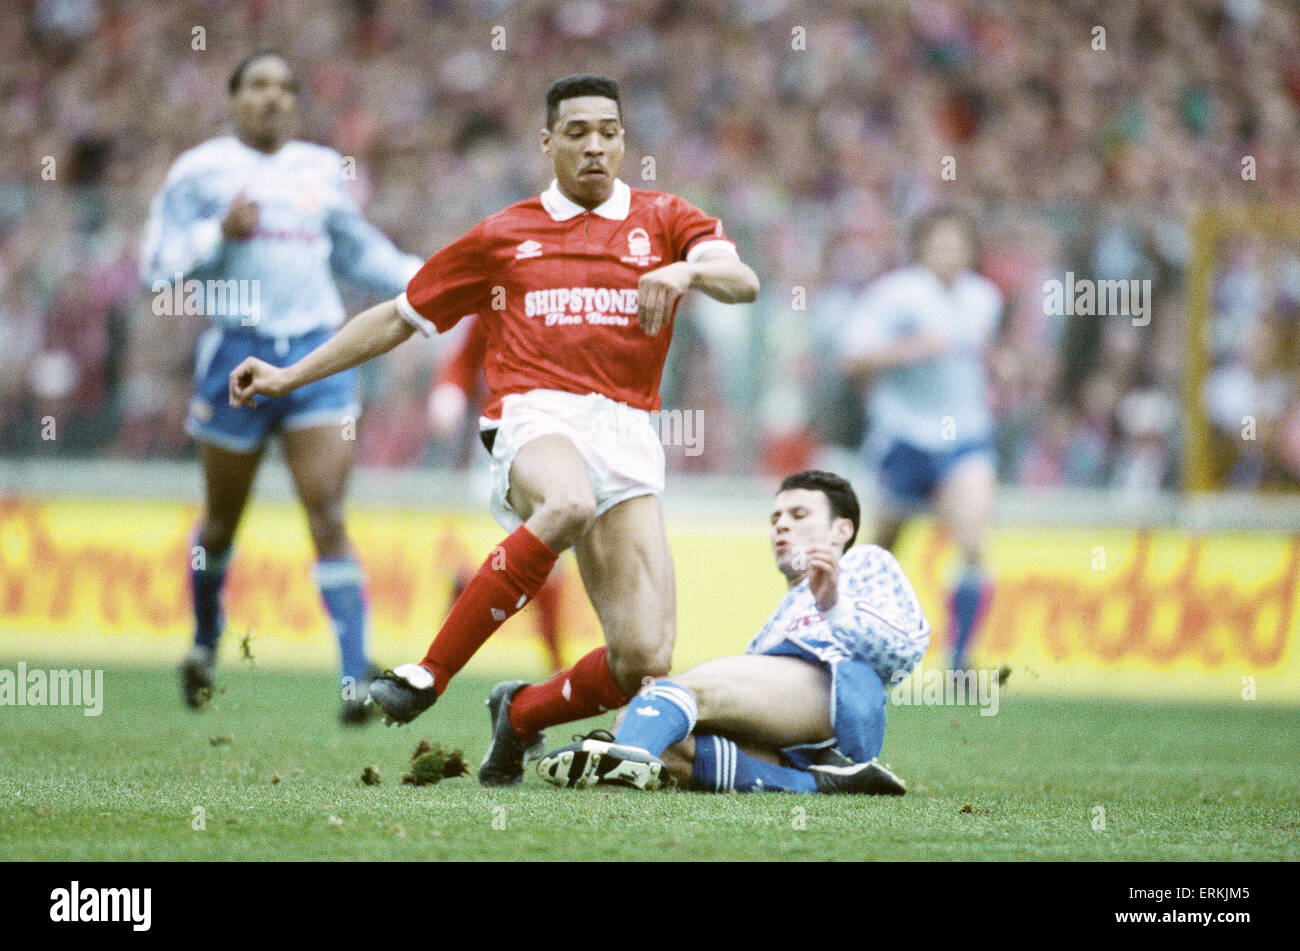 Rumbelows Cup Final at Wembley Stadium. Nottingham Forest 0 v Manchester United 1.  Forest's Des Walker moves away from the sliding challenge of Ryan Giggs.  12th April 1992. Stock Photo